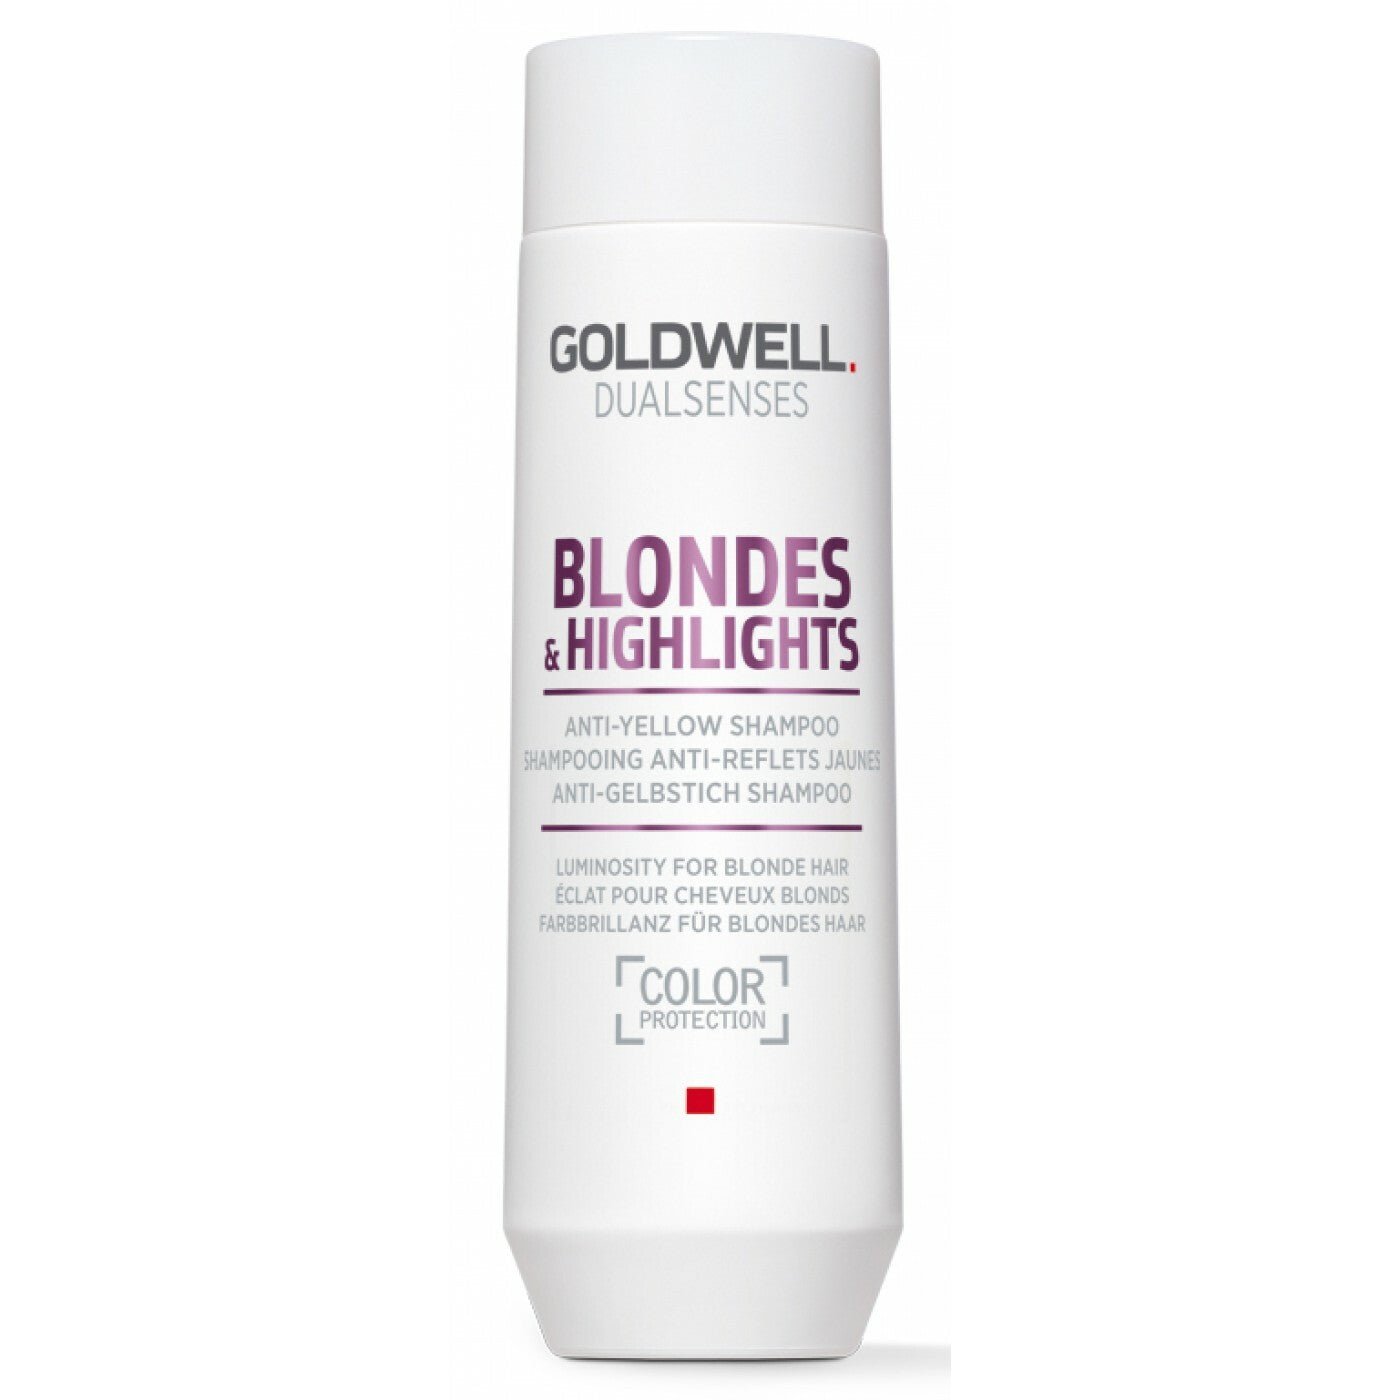 Goldwell Dual Senses Blondes & Highlights Anti Yellow Shampoo - Exquisite Laser Clinic